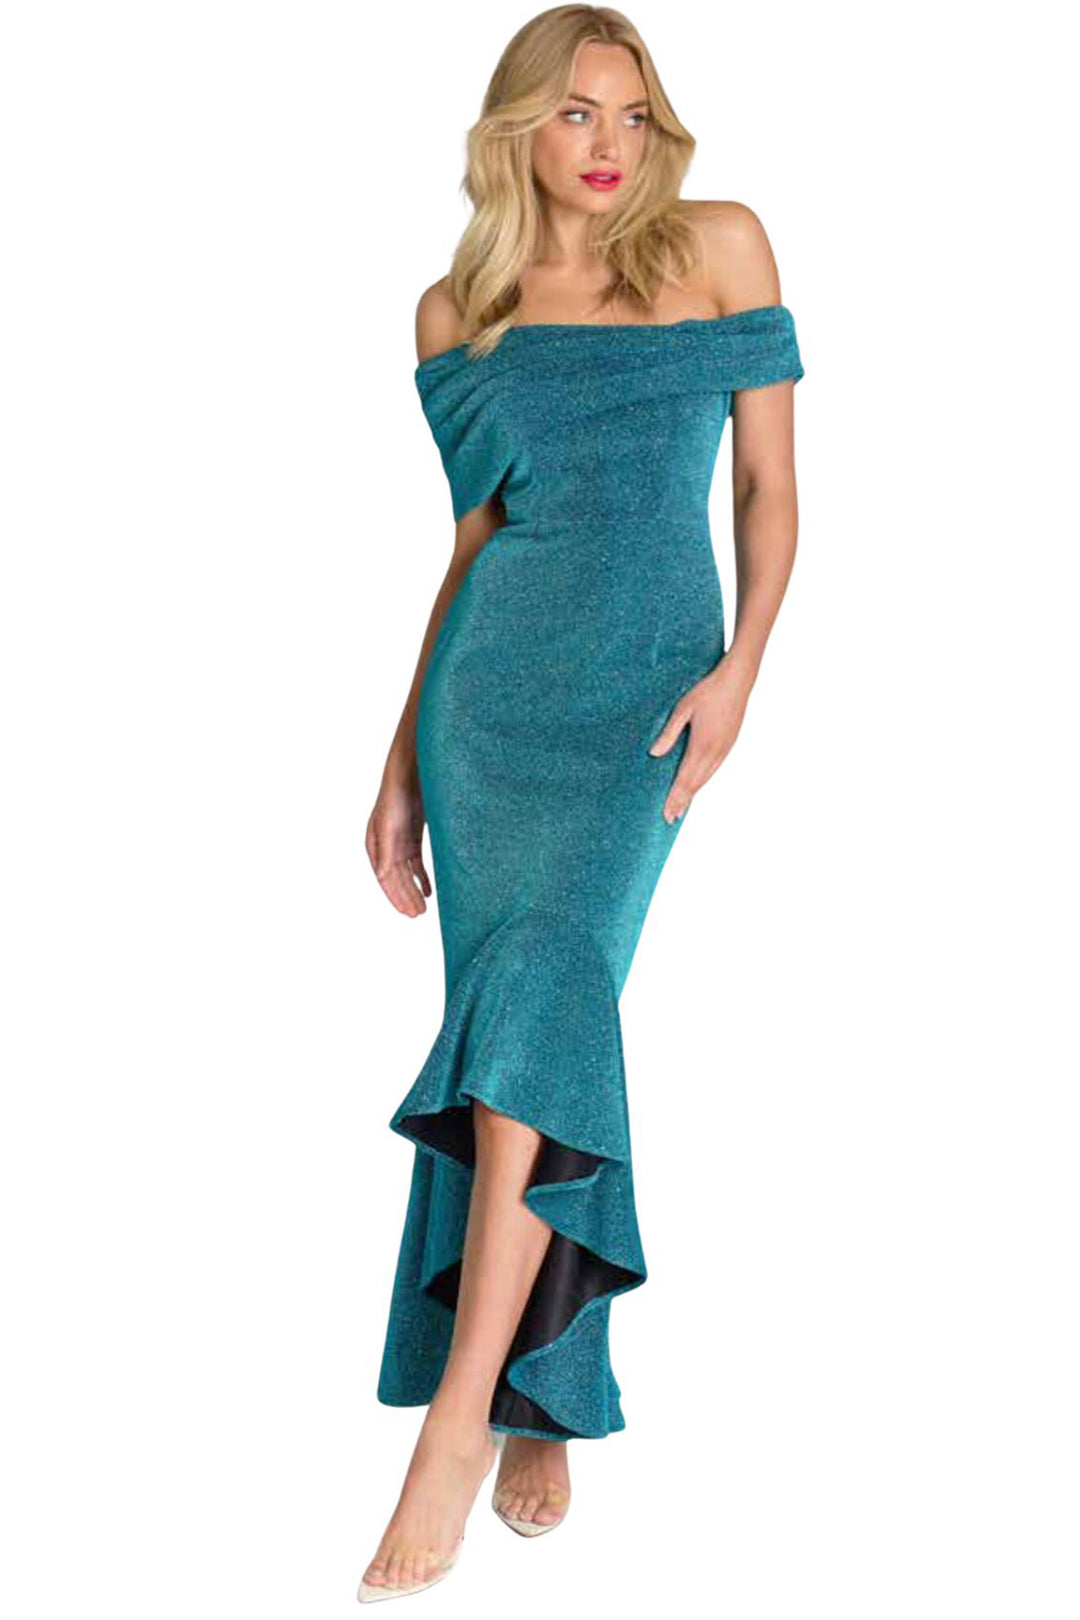 Woman wearing s blue shimmer off the shoulder gown with a mermaid tail hem designed by Romance, by Pizazz Boutique ladies clothing